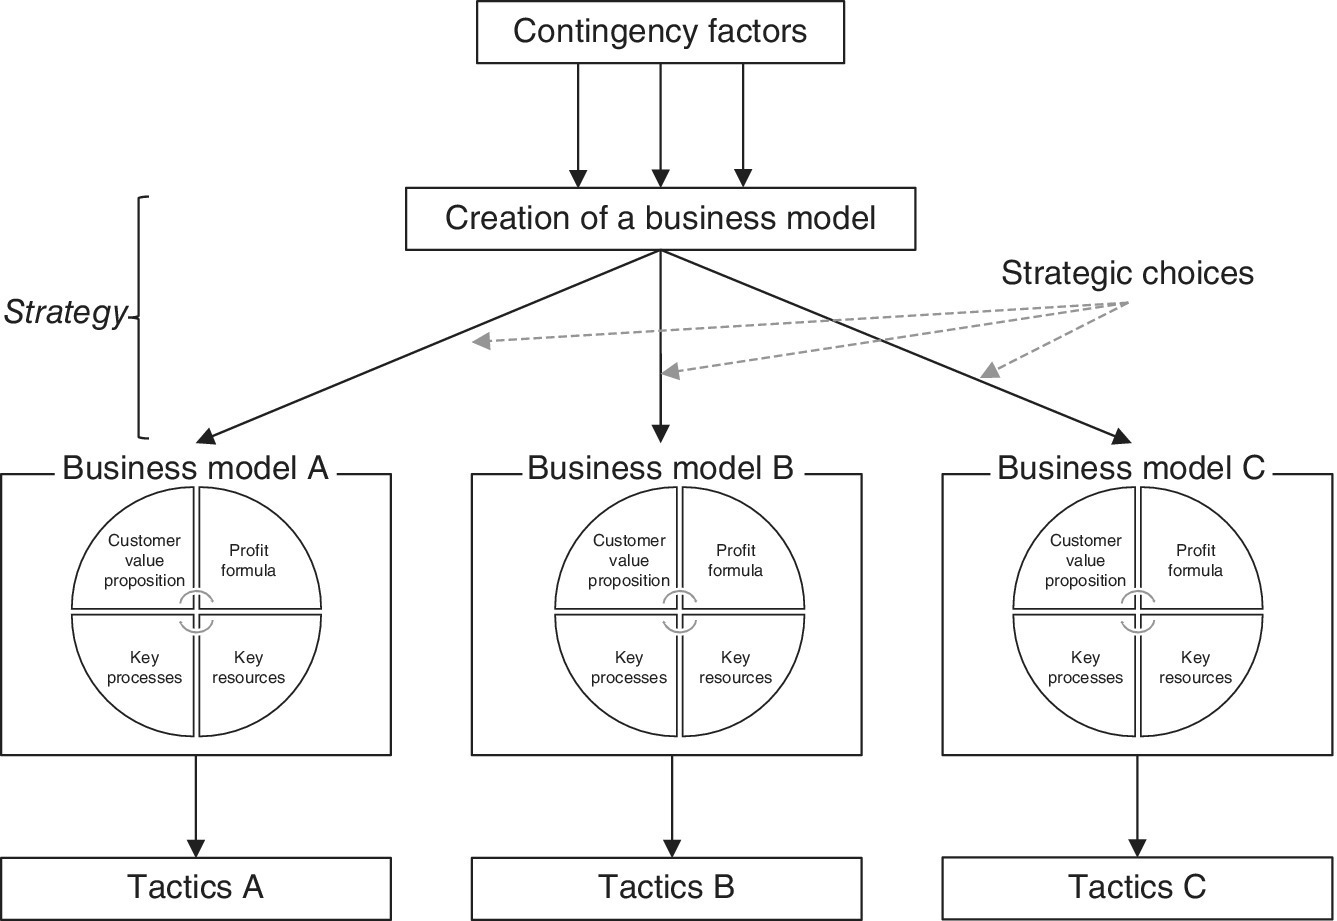 Relationship between strategy, business model and tactics, displaying arrows from Contingency factors to Creation of a business model, branching to business models A, B, and C, and to tactics A, B, and C, respectively.